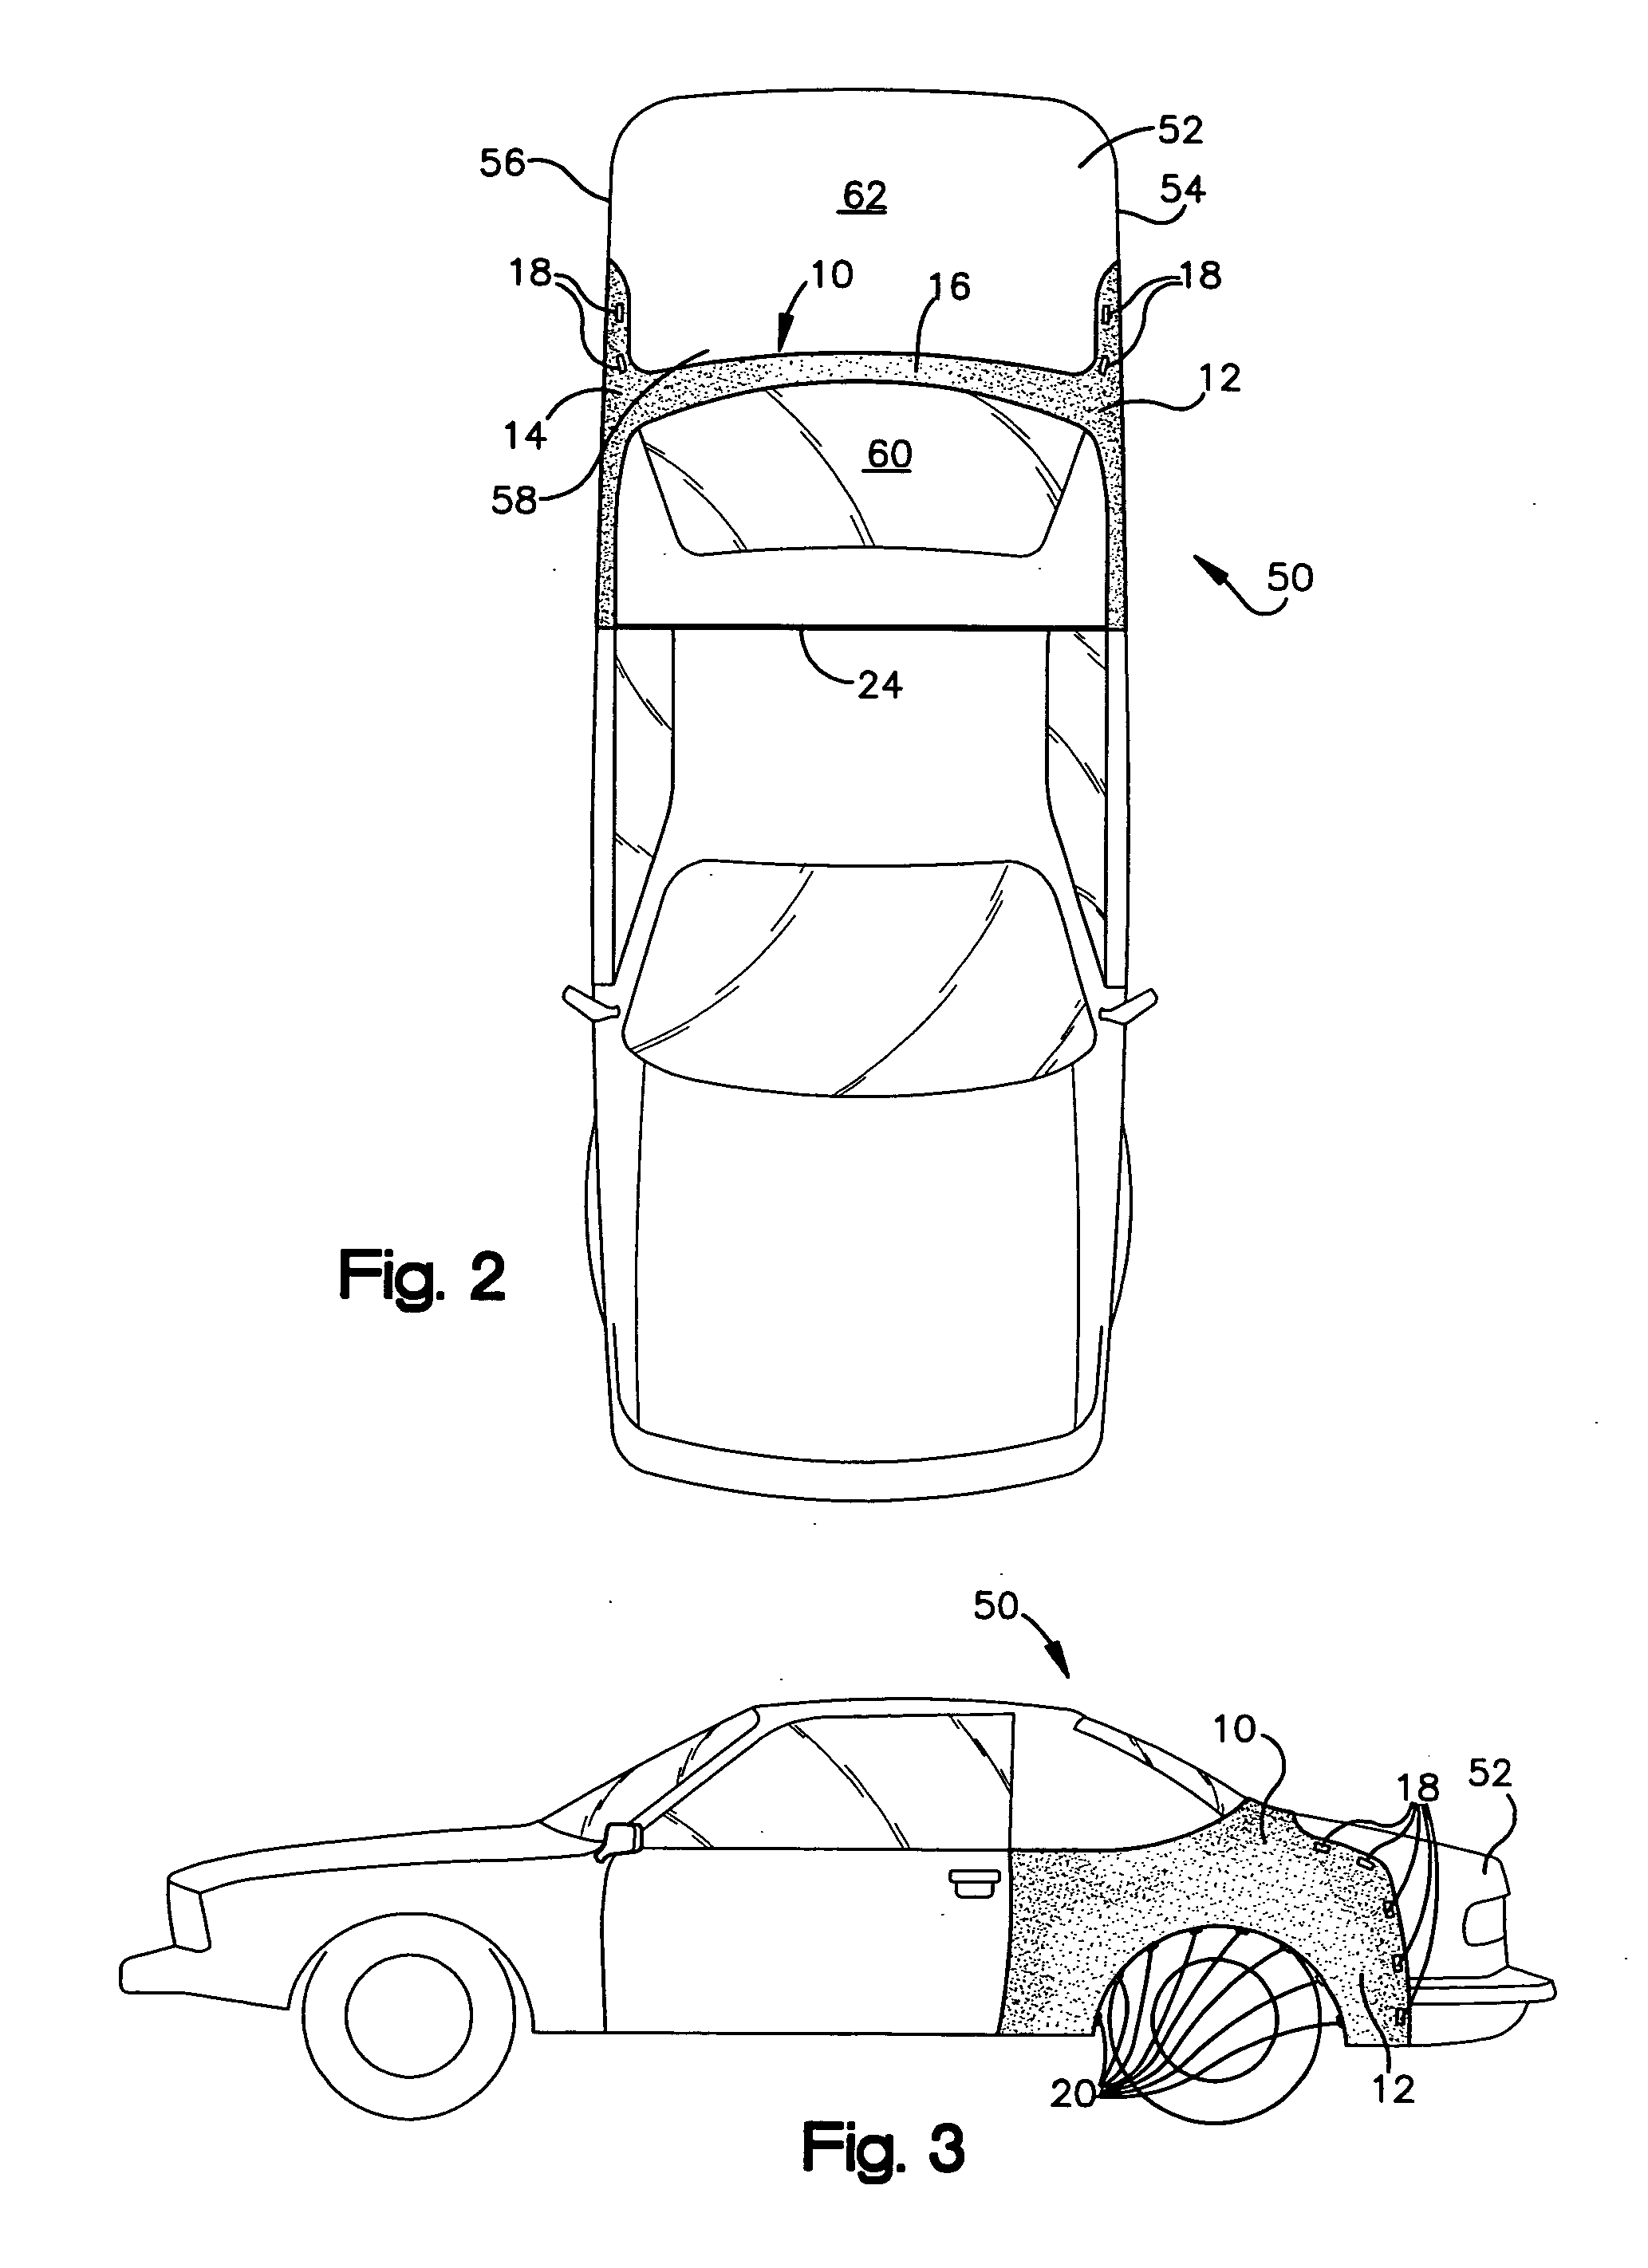 Cover for covering selected portions of a vehicle